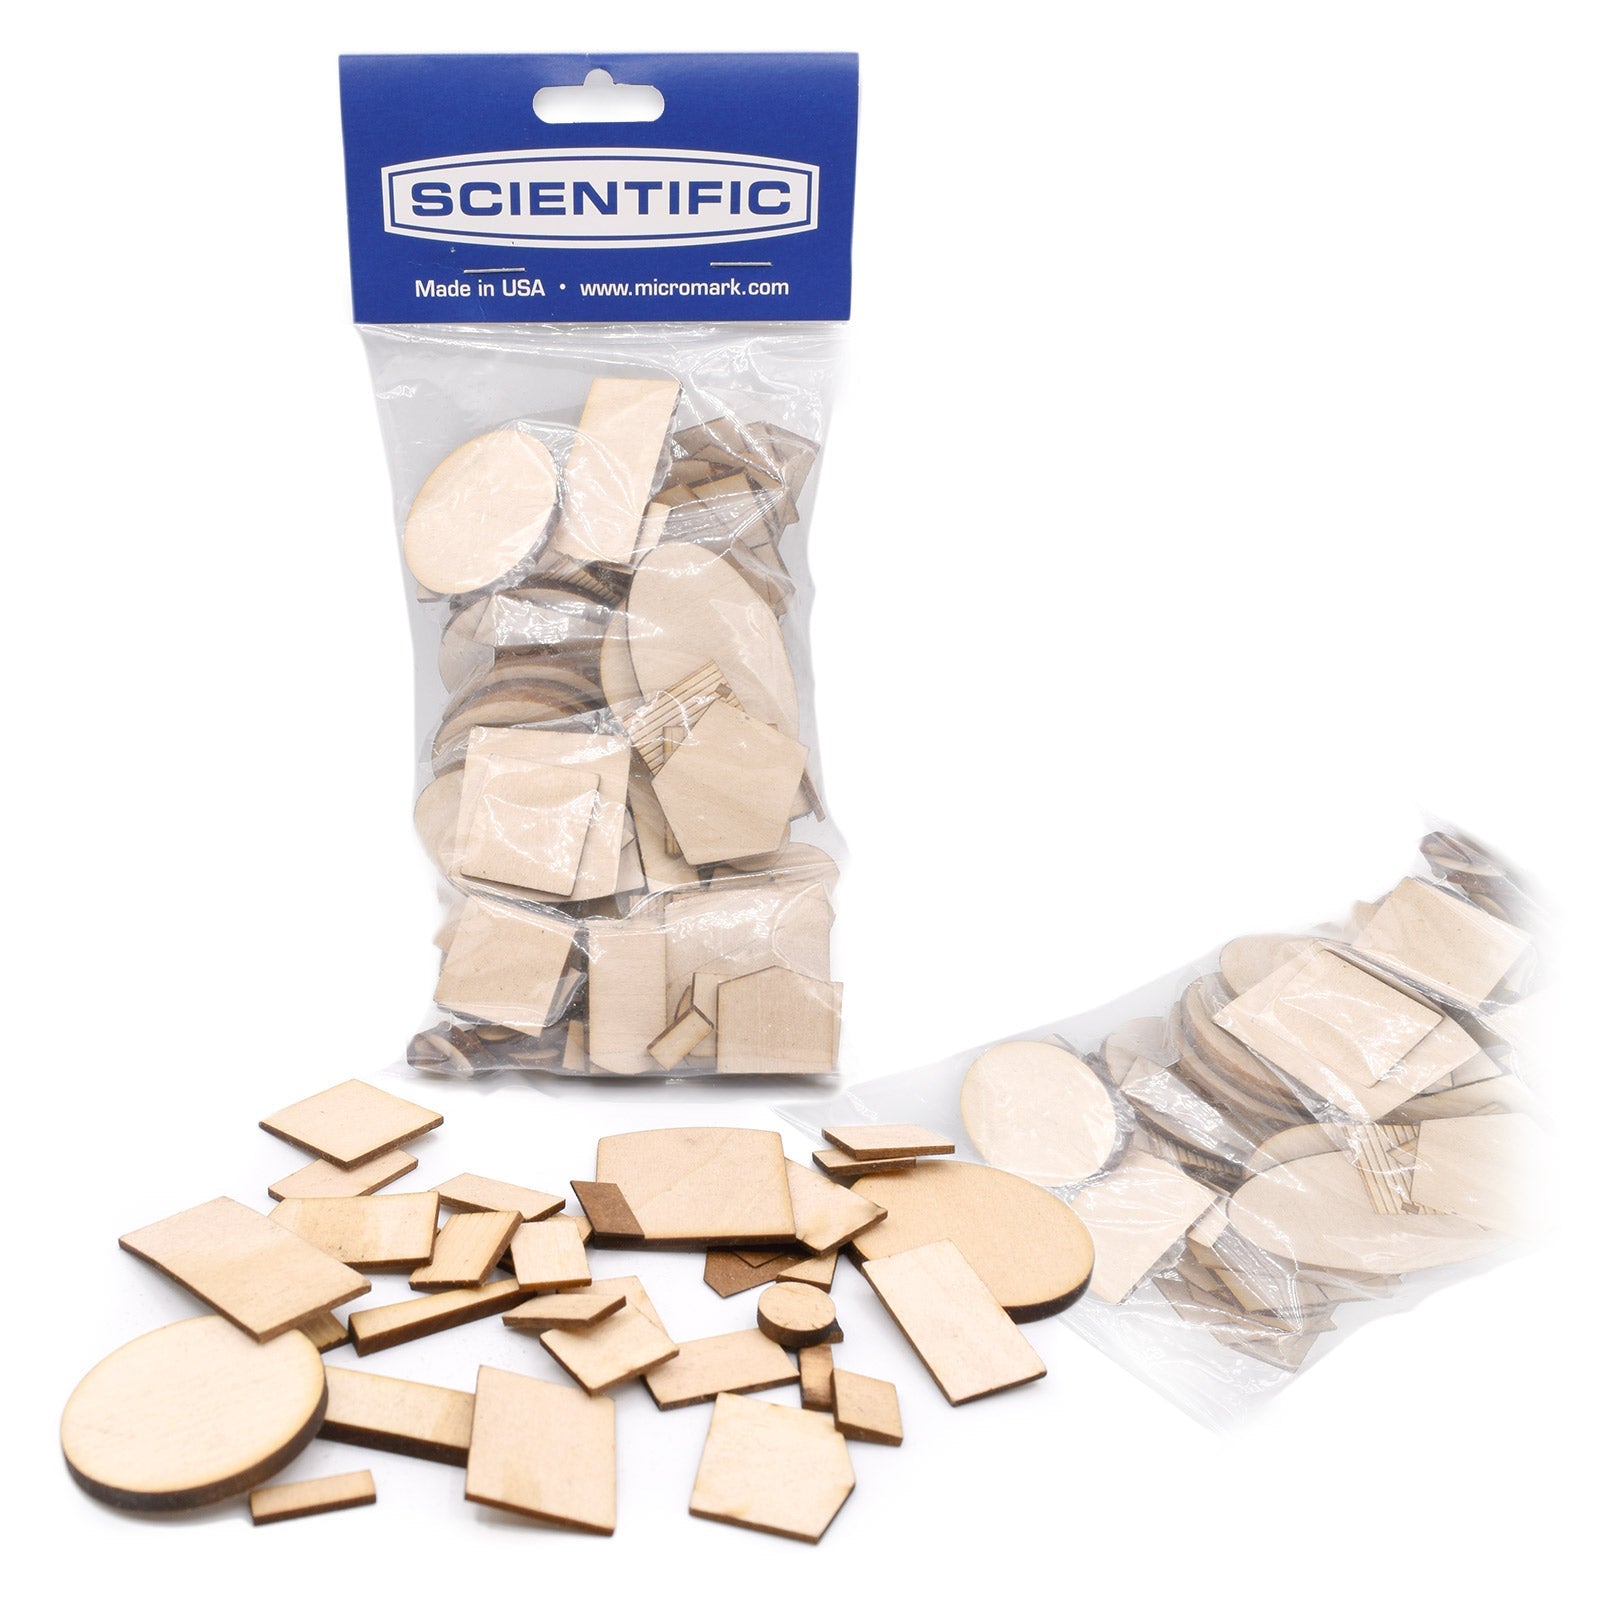 Assorted Laser Cut Shapes and Materials, by Scientific